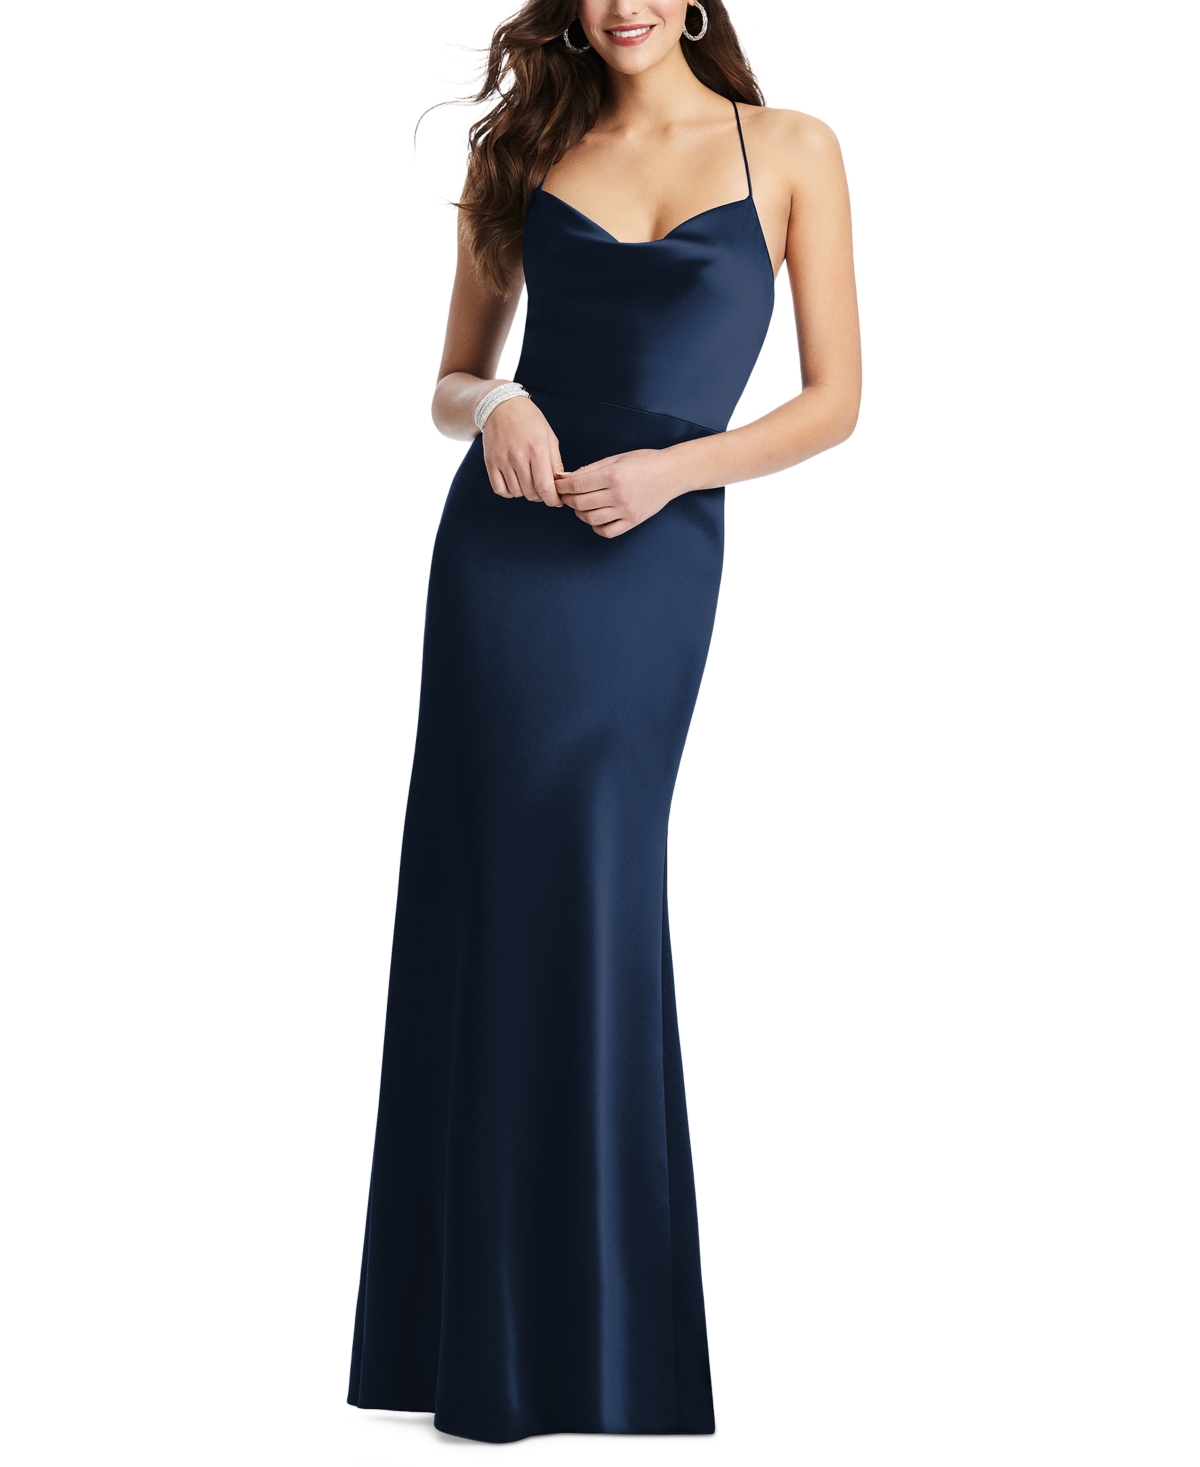 Dessy Collection Cowlneck Sleeveless Maxi Dress